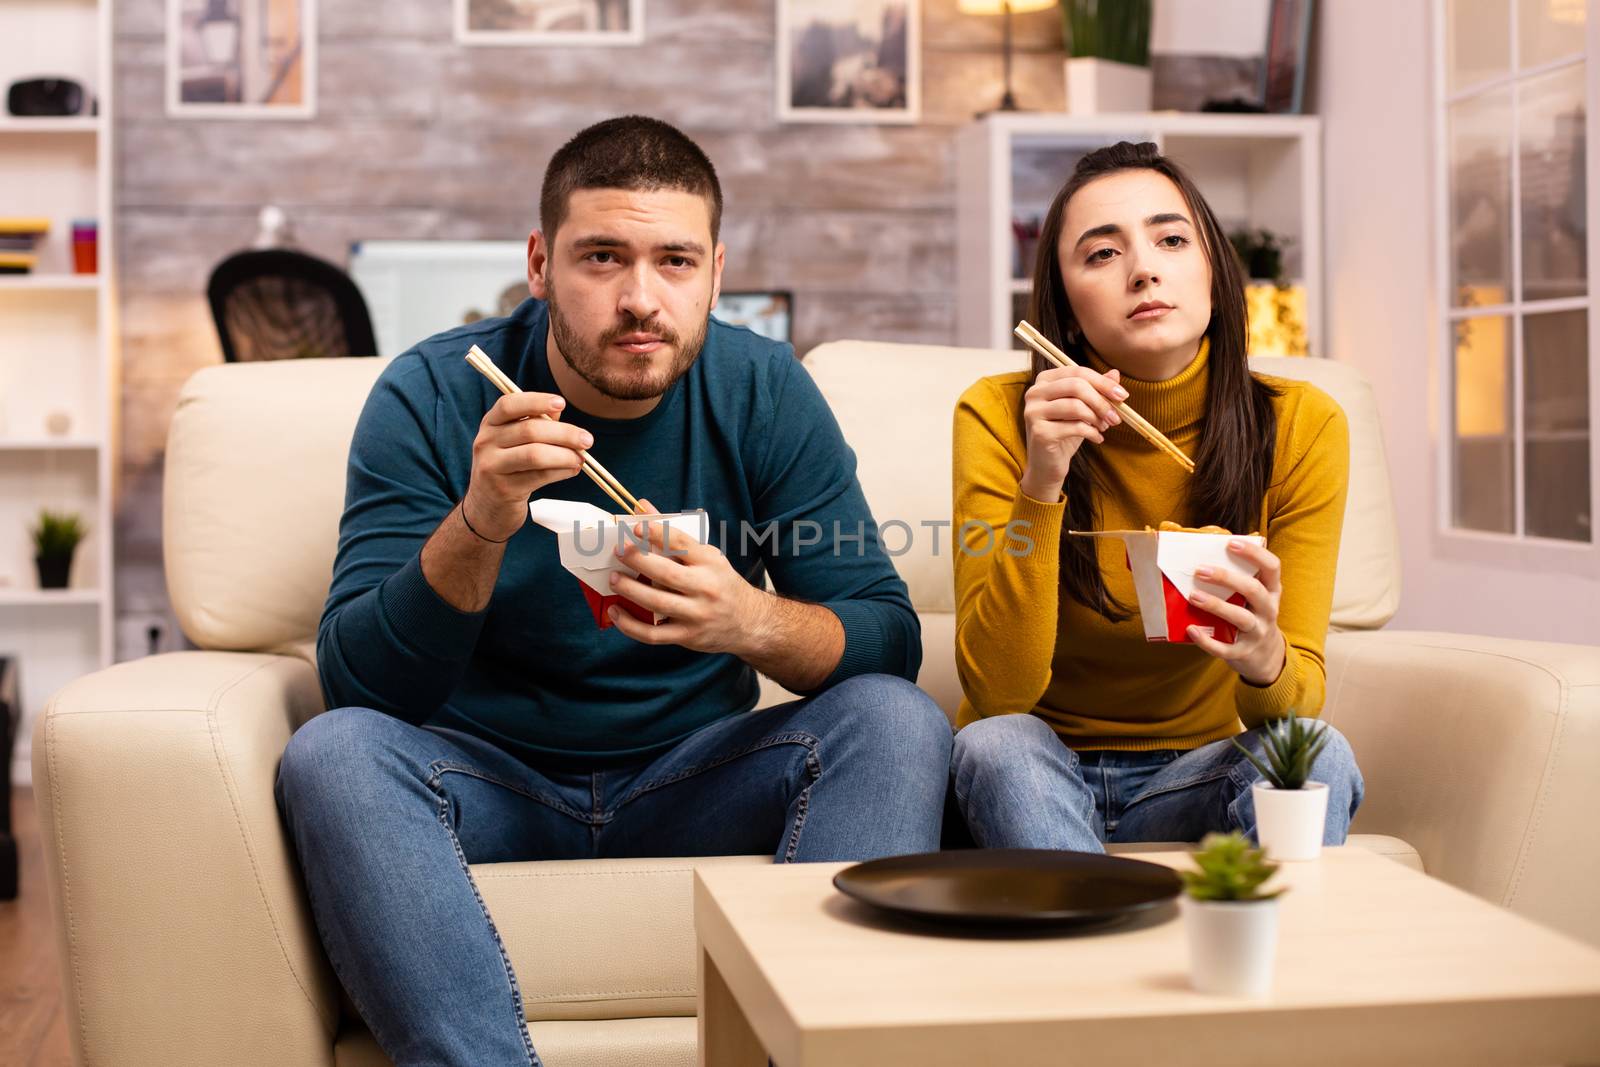 In modern cozy living room couple is enjoying takeaway noodles while watching TV comfortably on the sofa